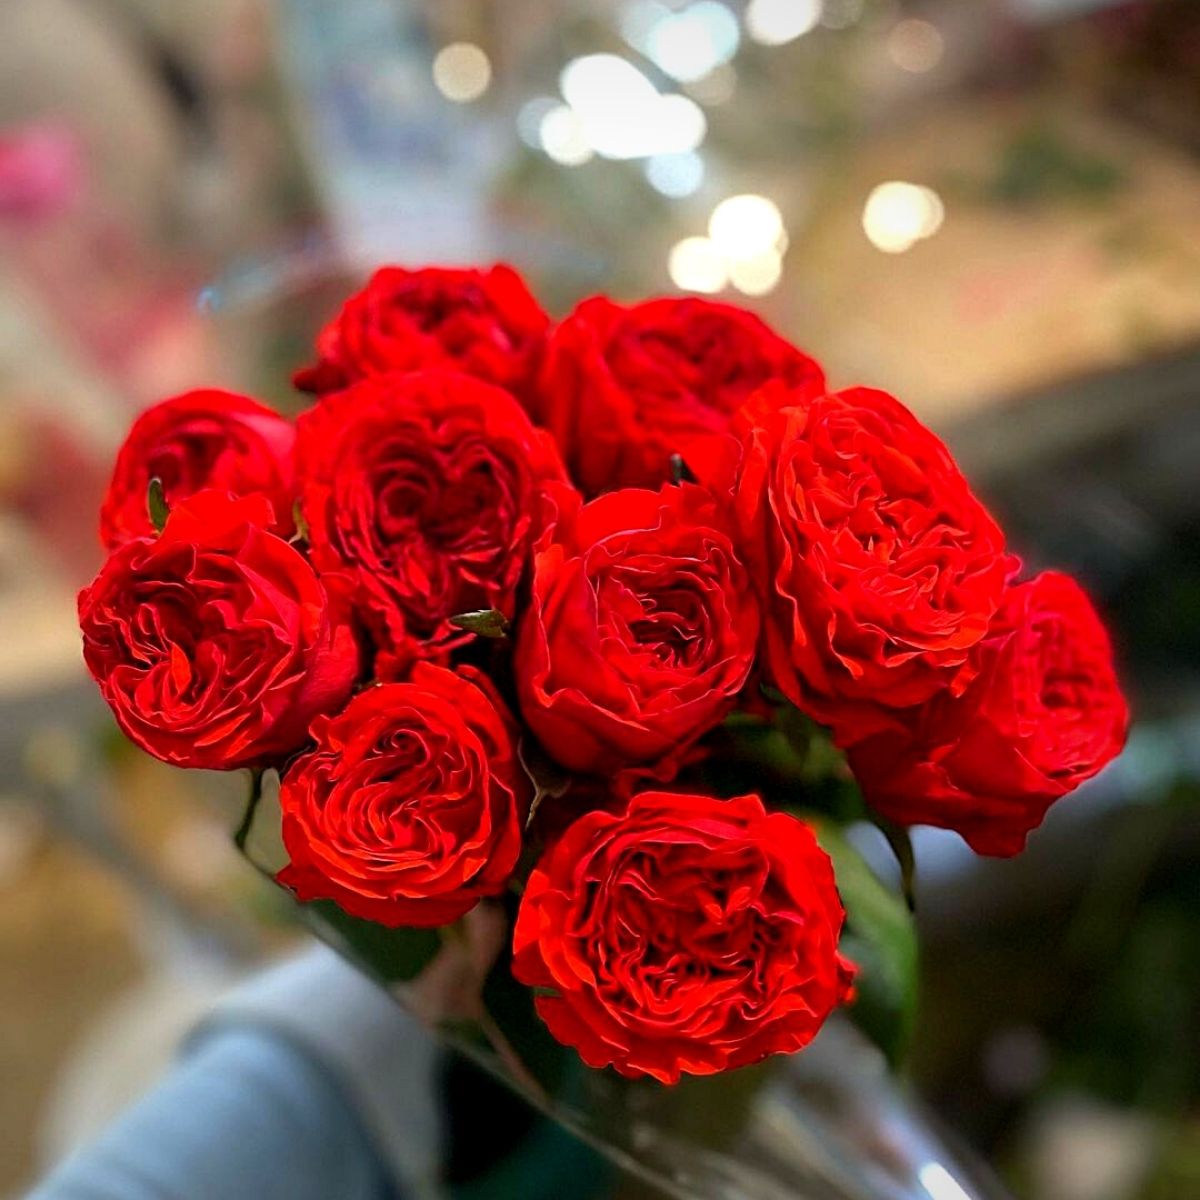 Bouquet of red roses for National Red Rose day celebrations